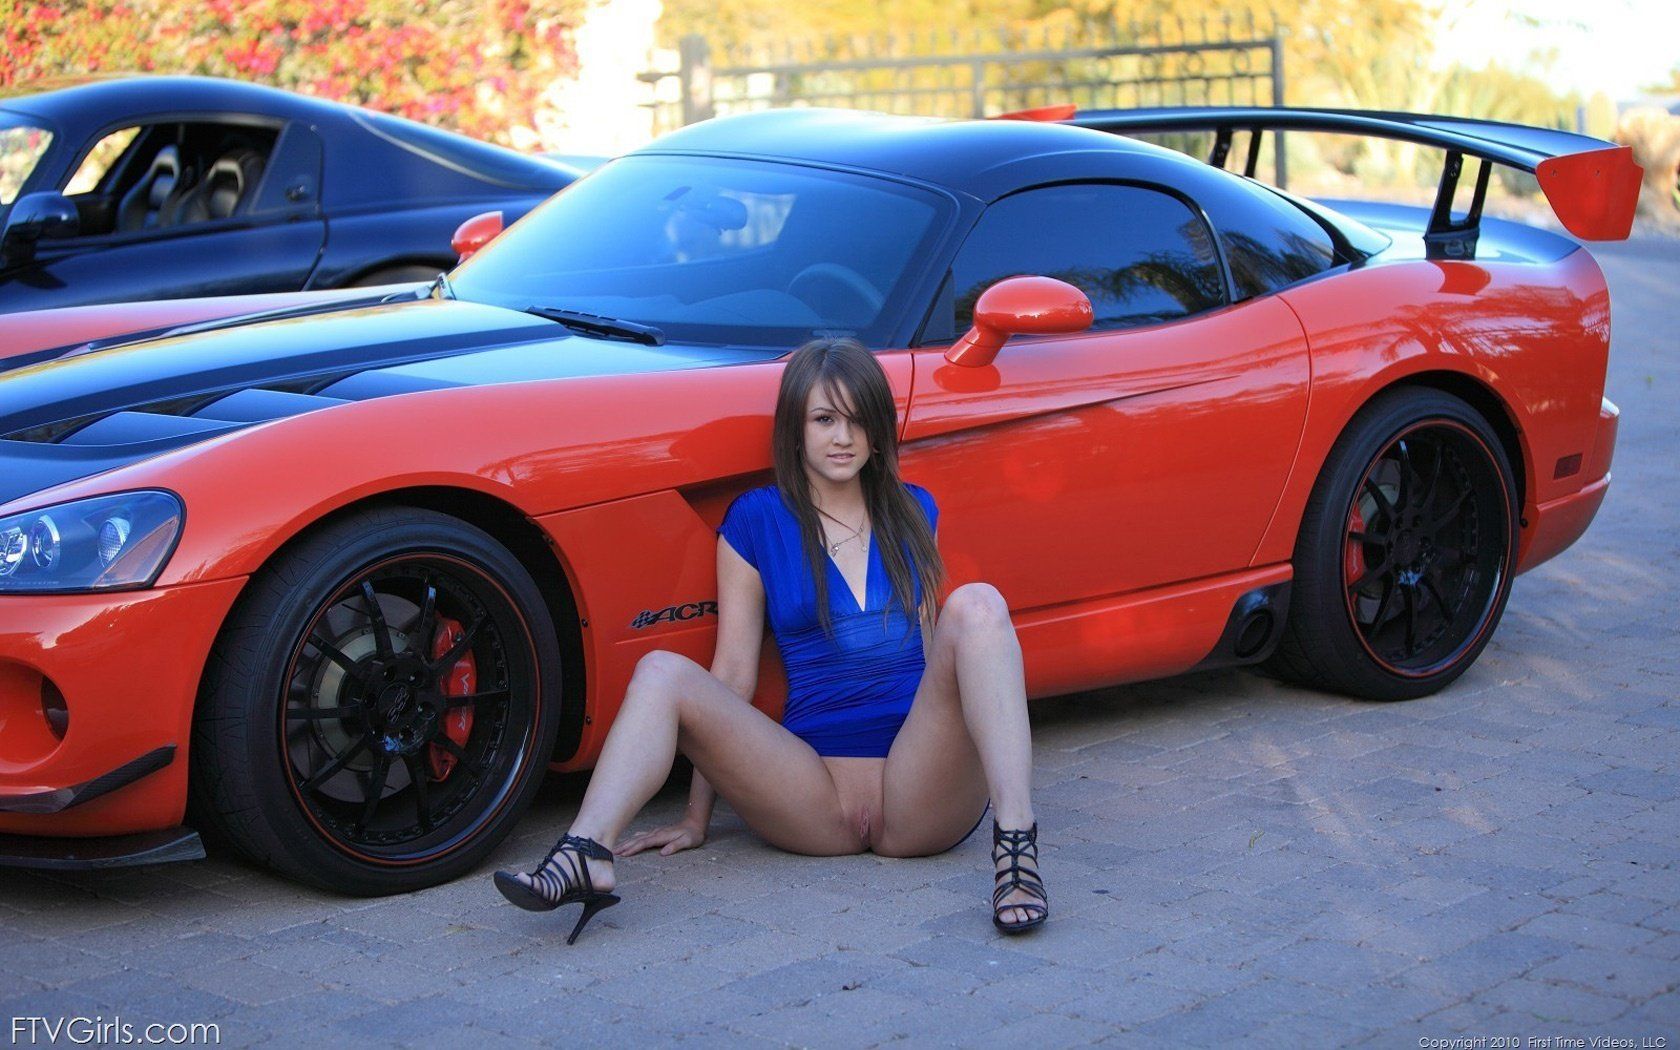 best of Driving other women Topless cars